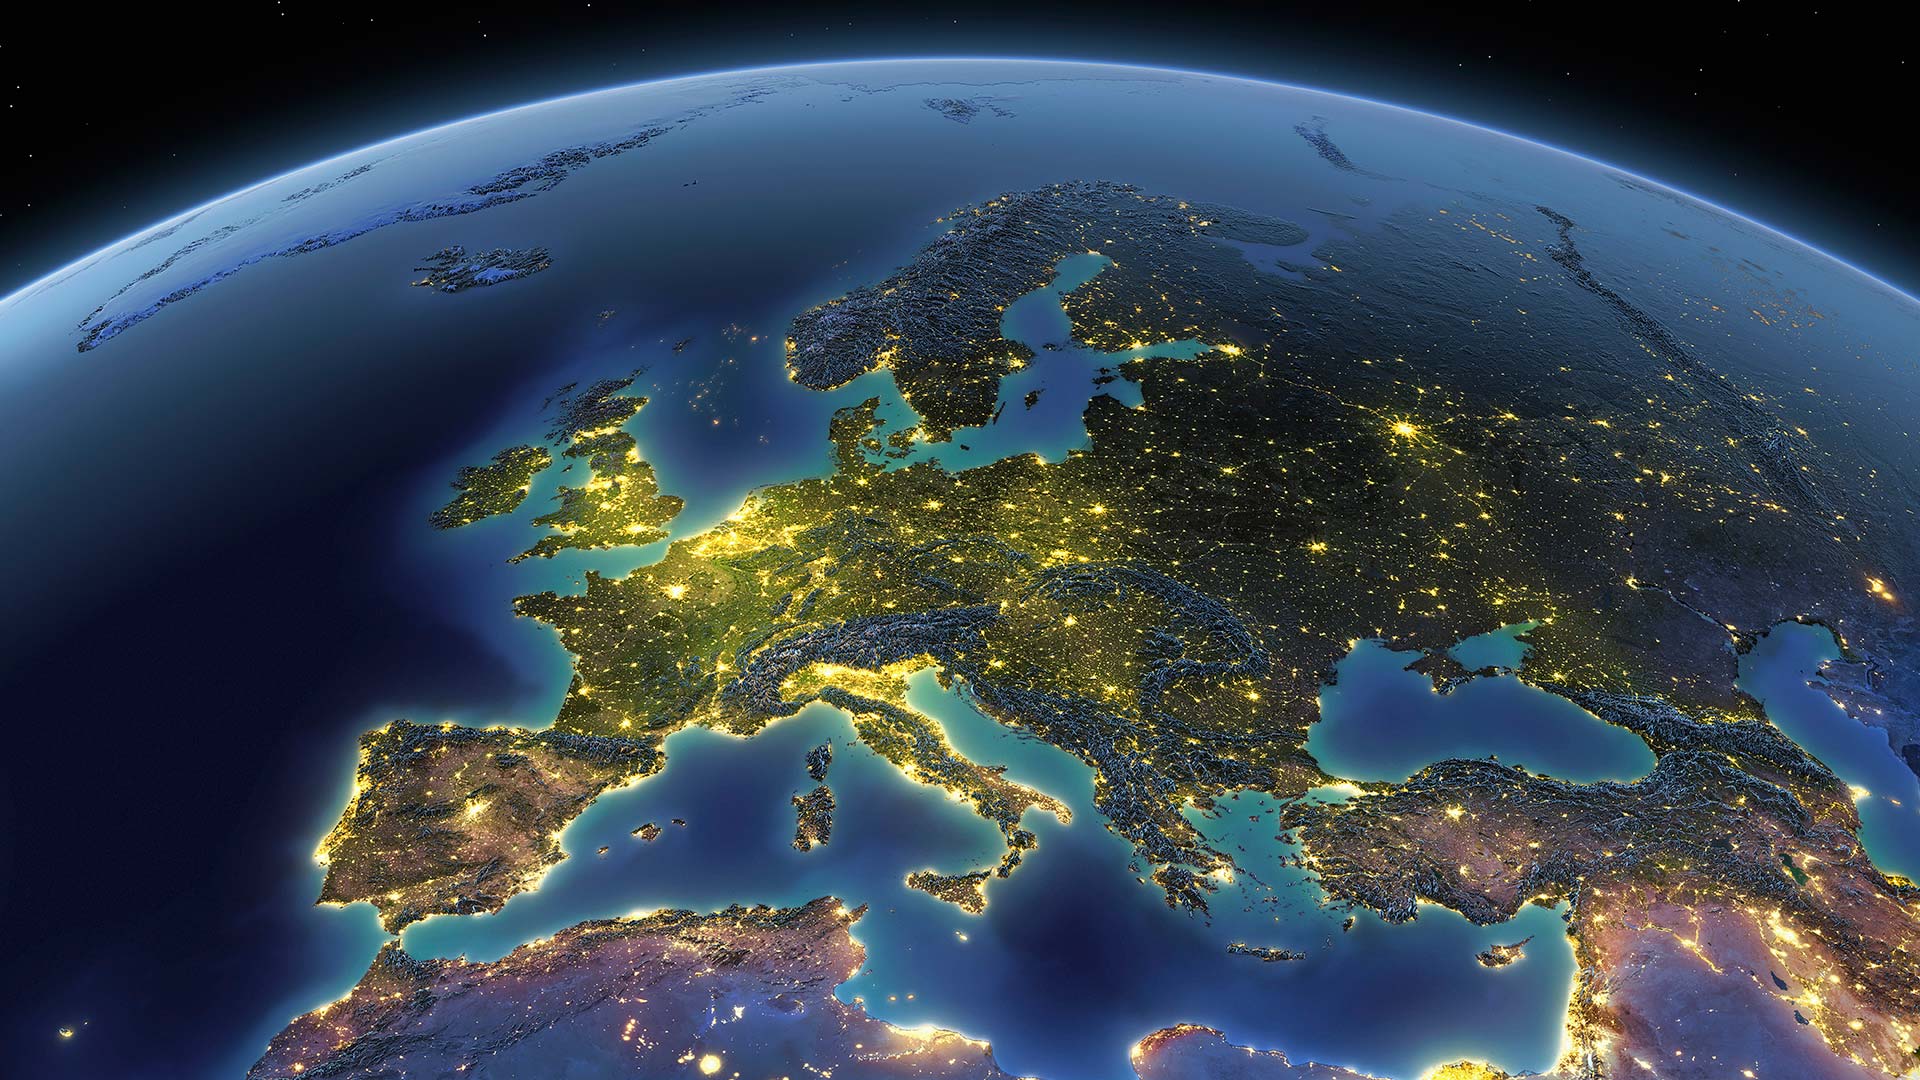 British Ecological Society image of Europe from Space